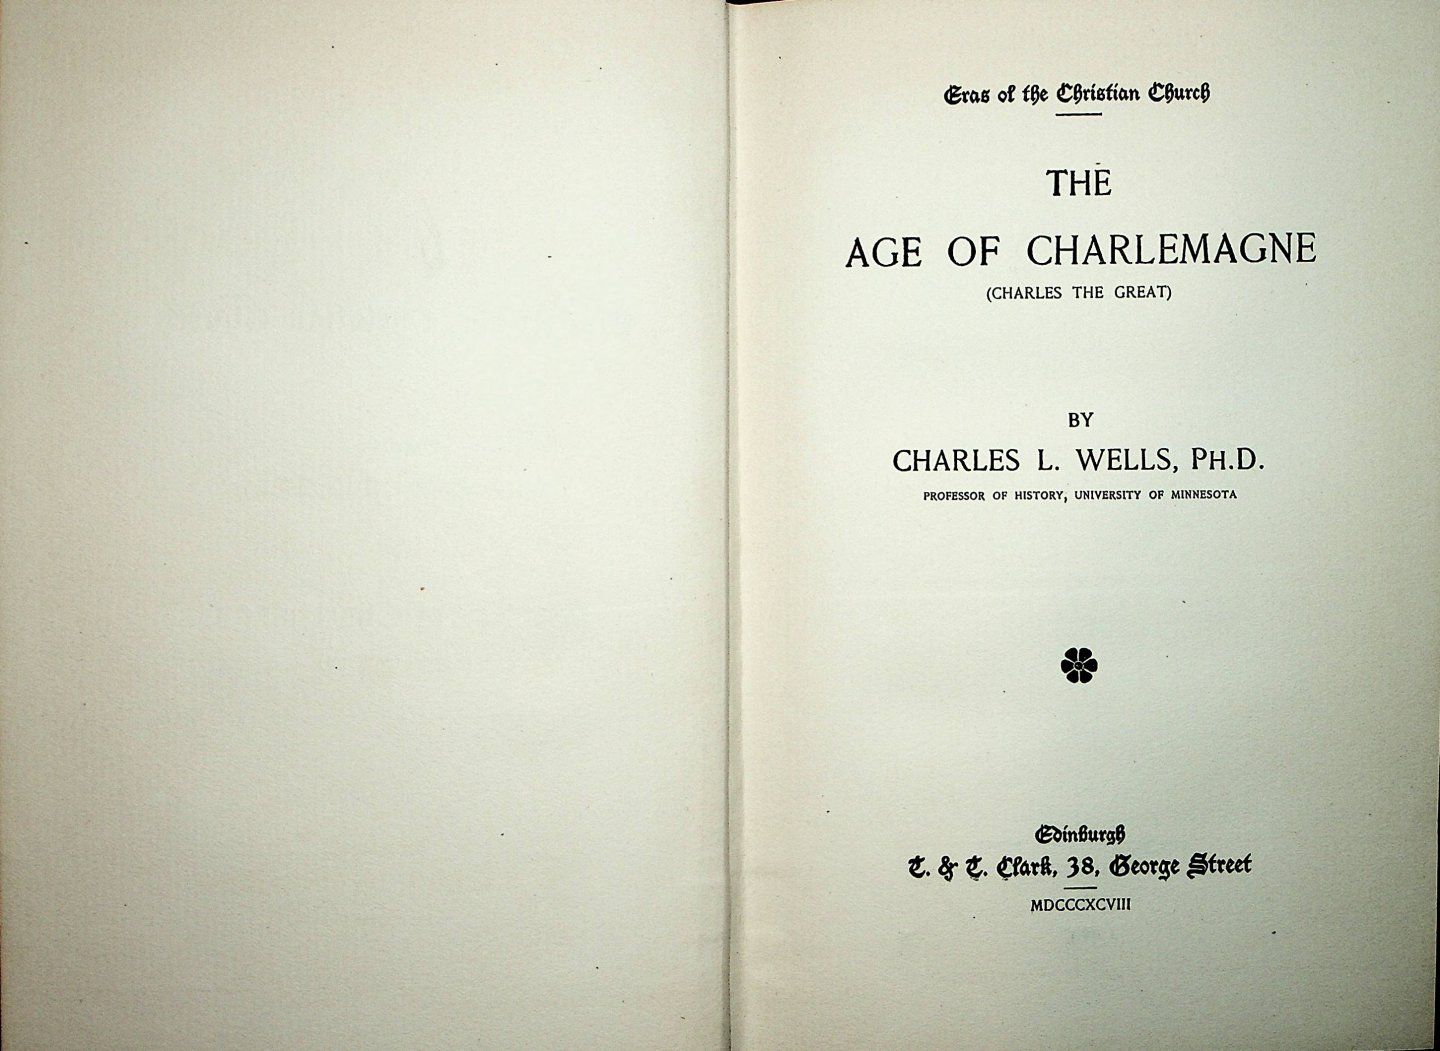 Wells, Charles L. - The age of Charlemagne (Charles the Great) / by Charles L. Wells